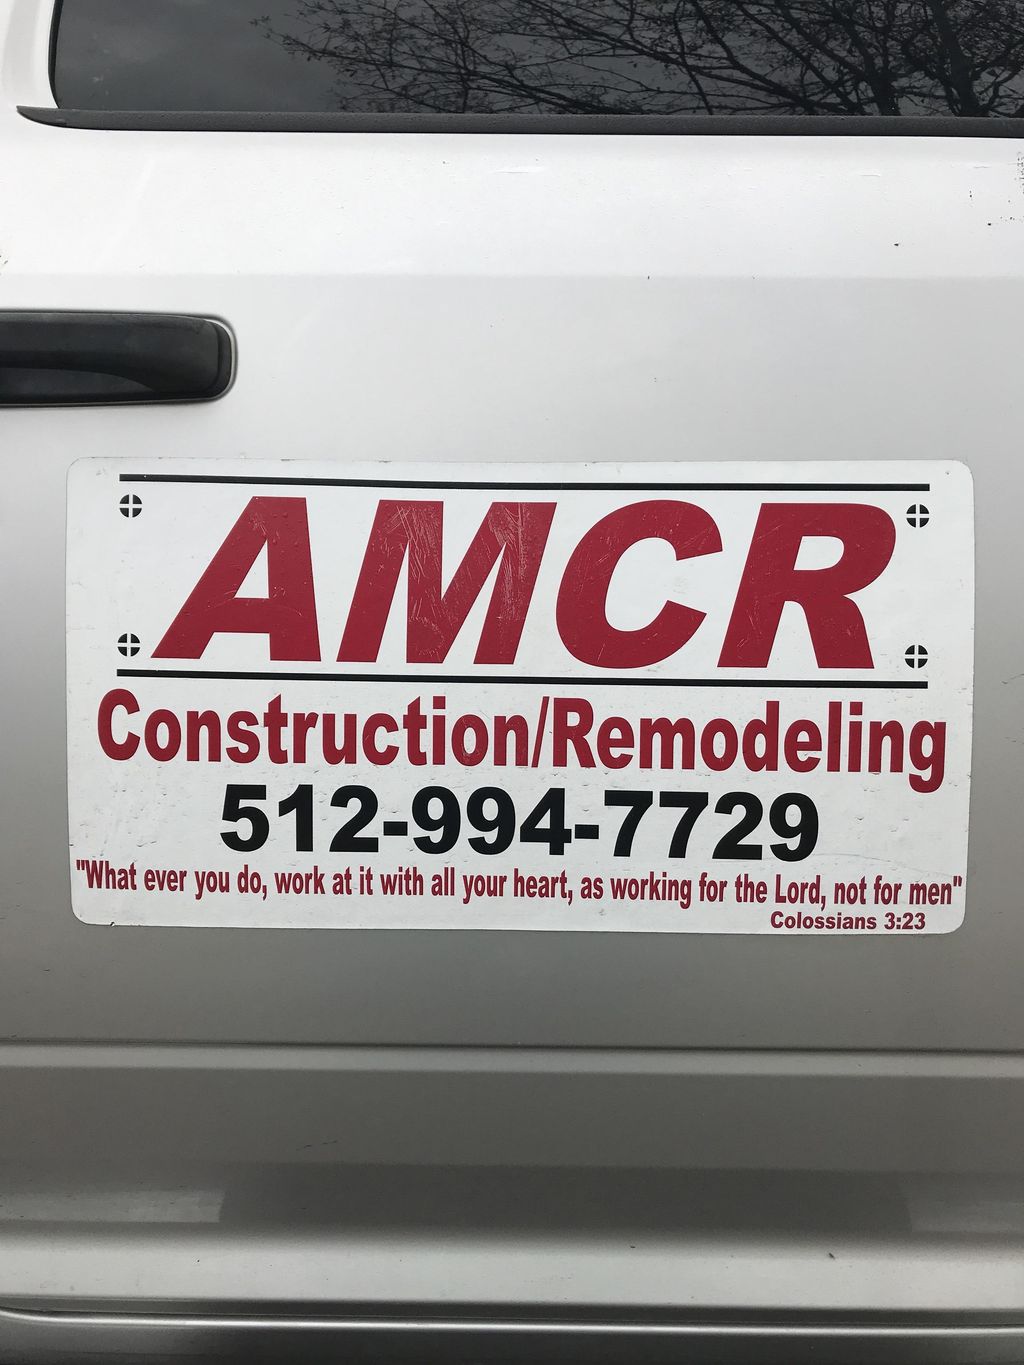 AMCR Construction and Remodeling